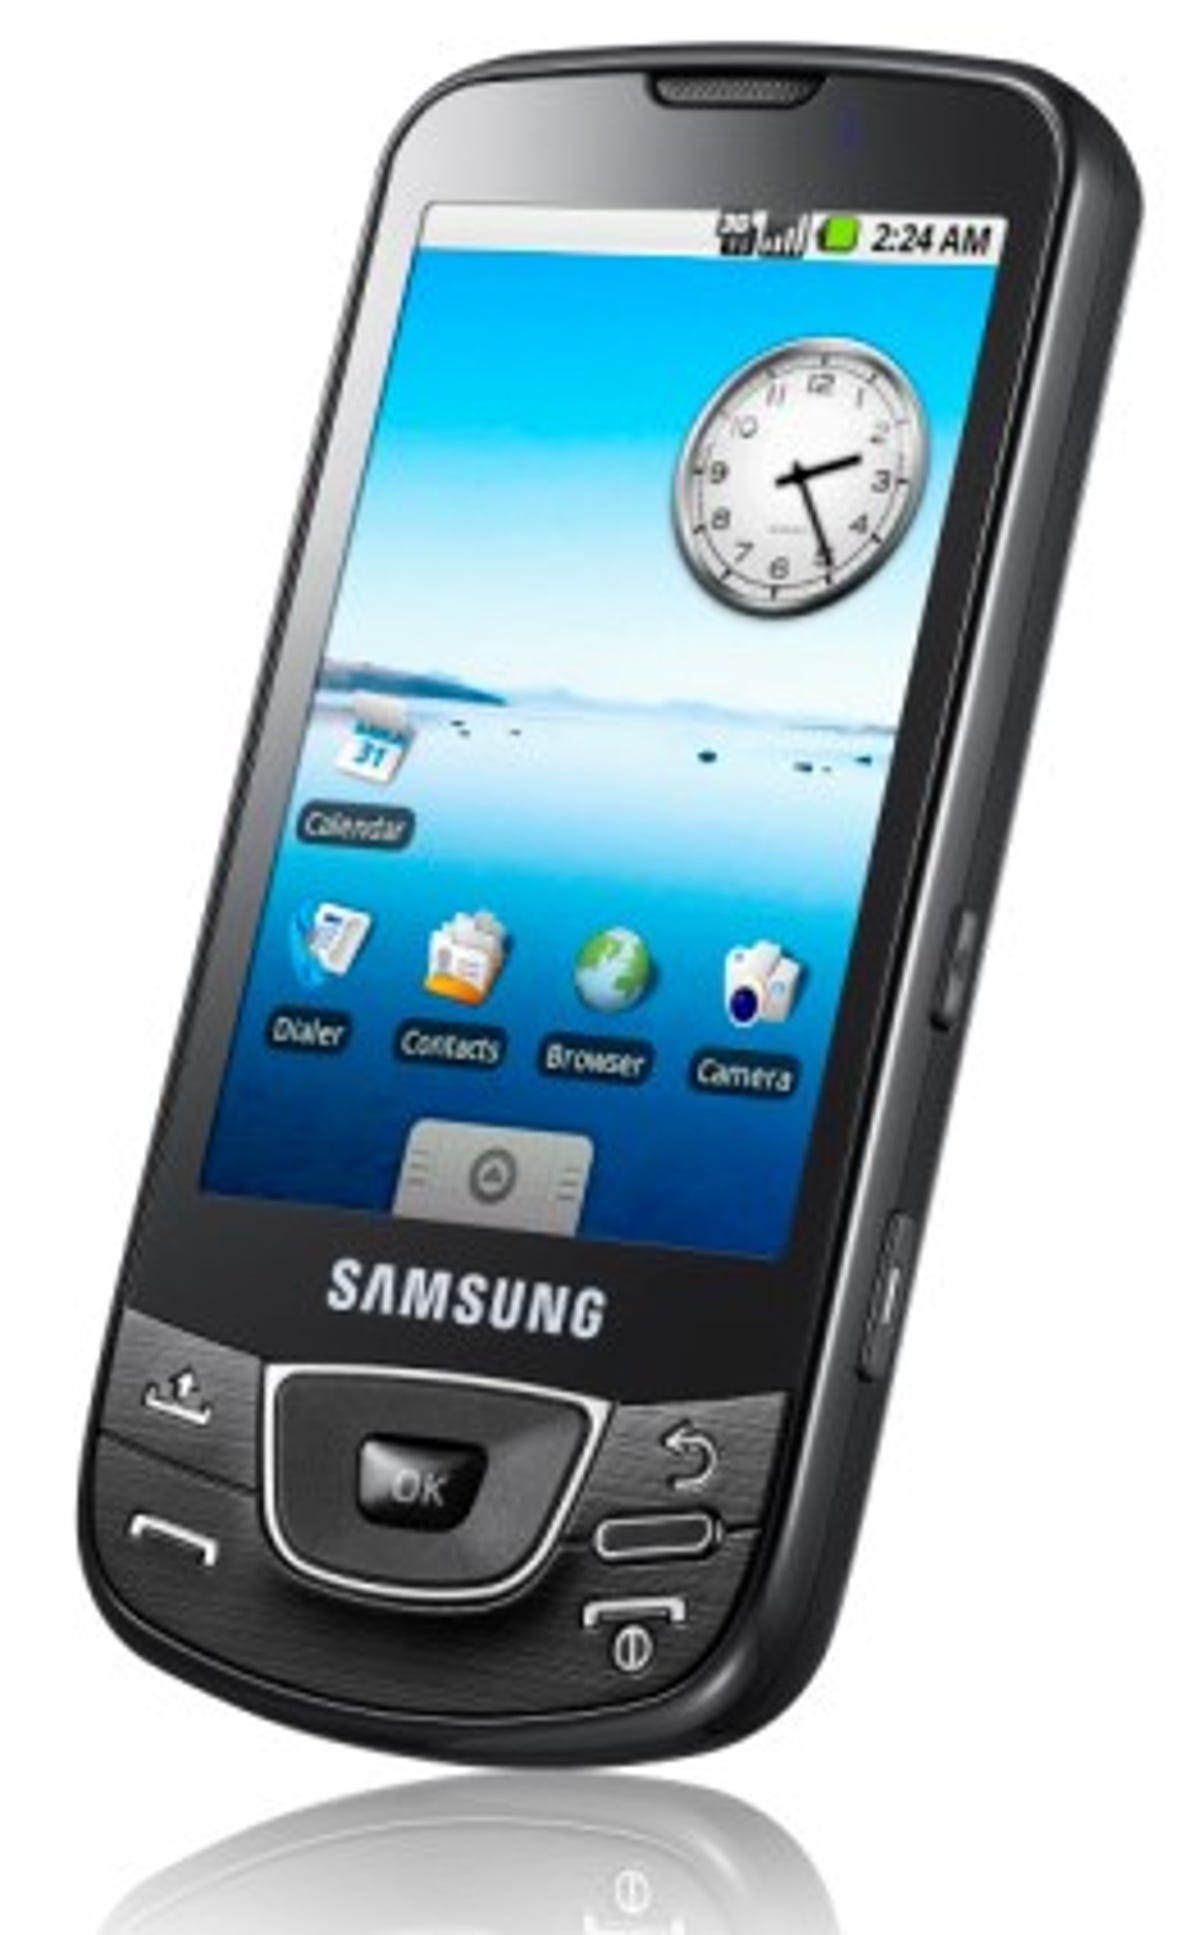 Samsung I7500 Android phone.